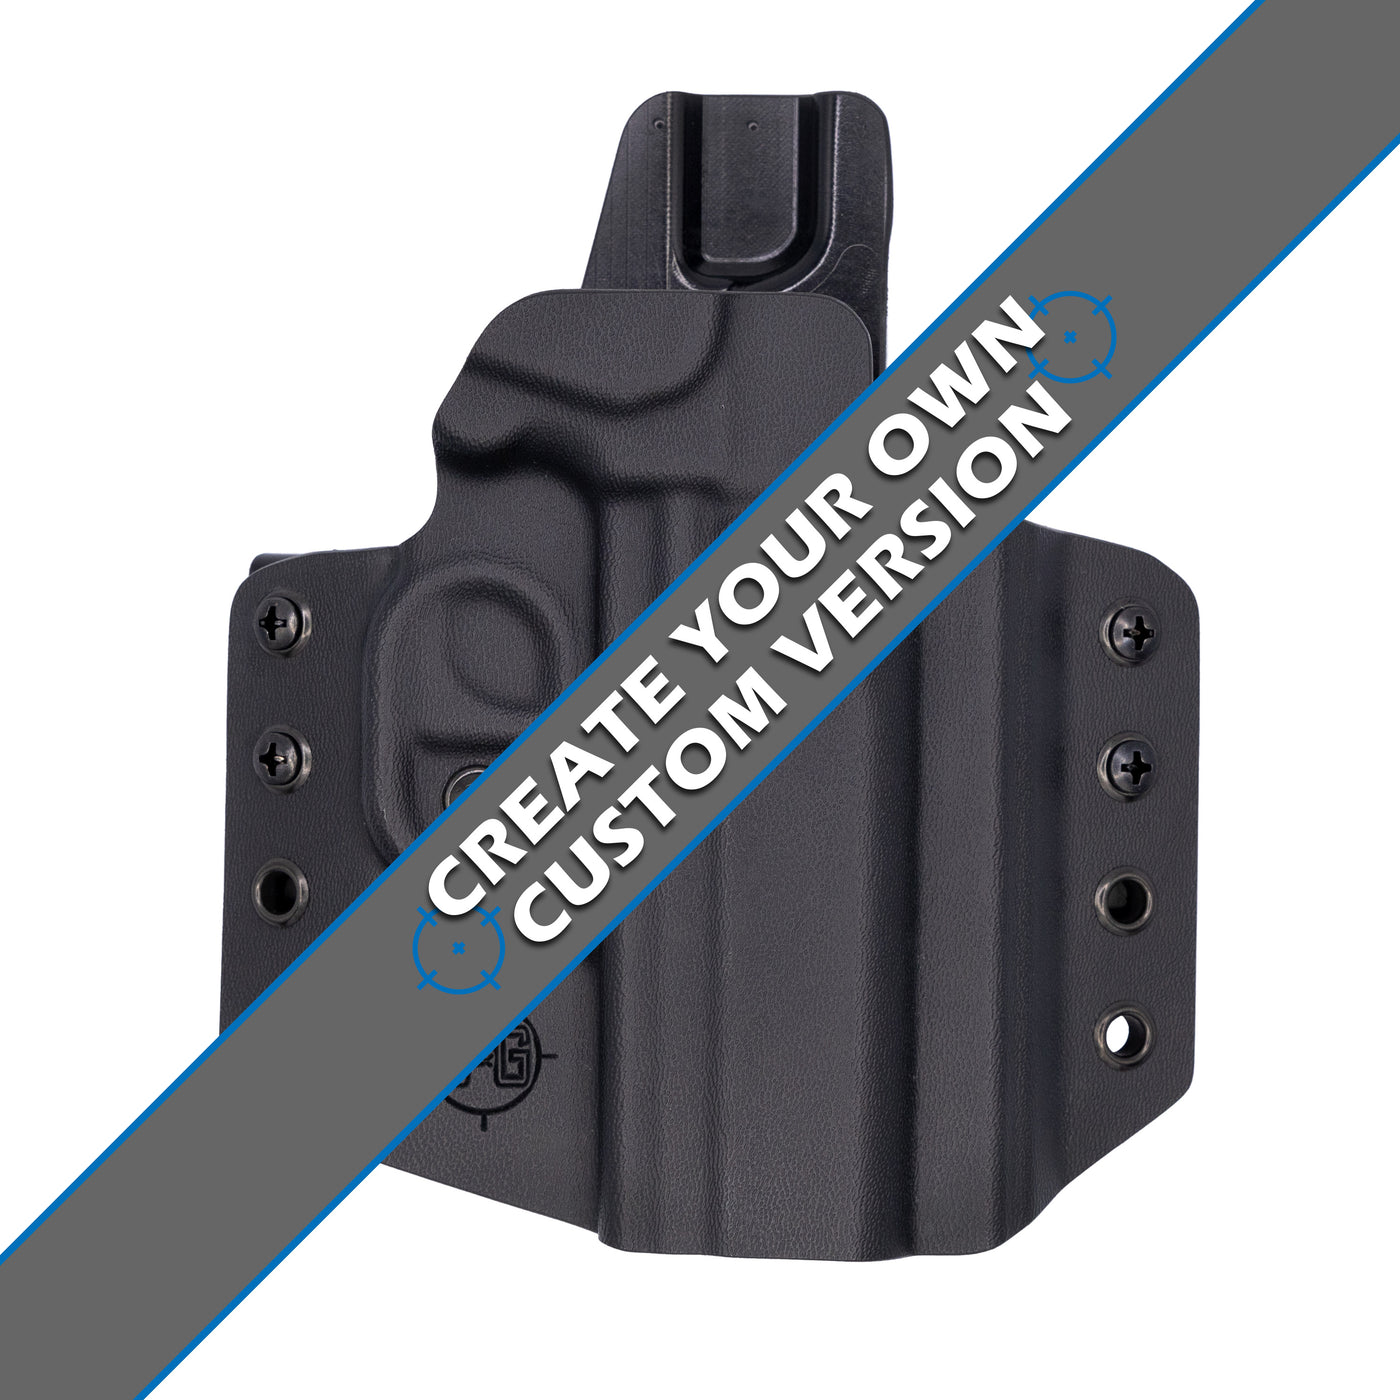 C&G Holsters custom OWB holster for the Staccato C2